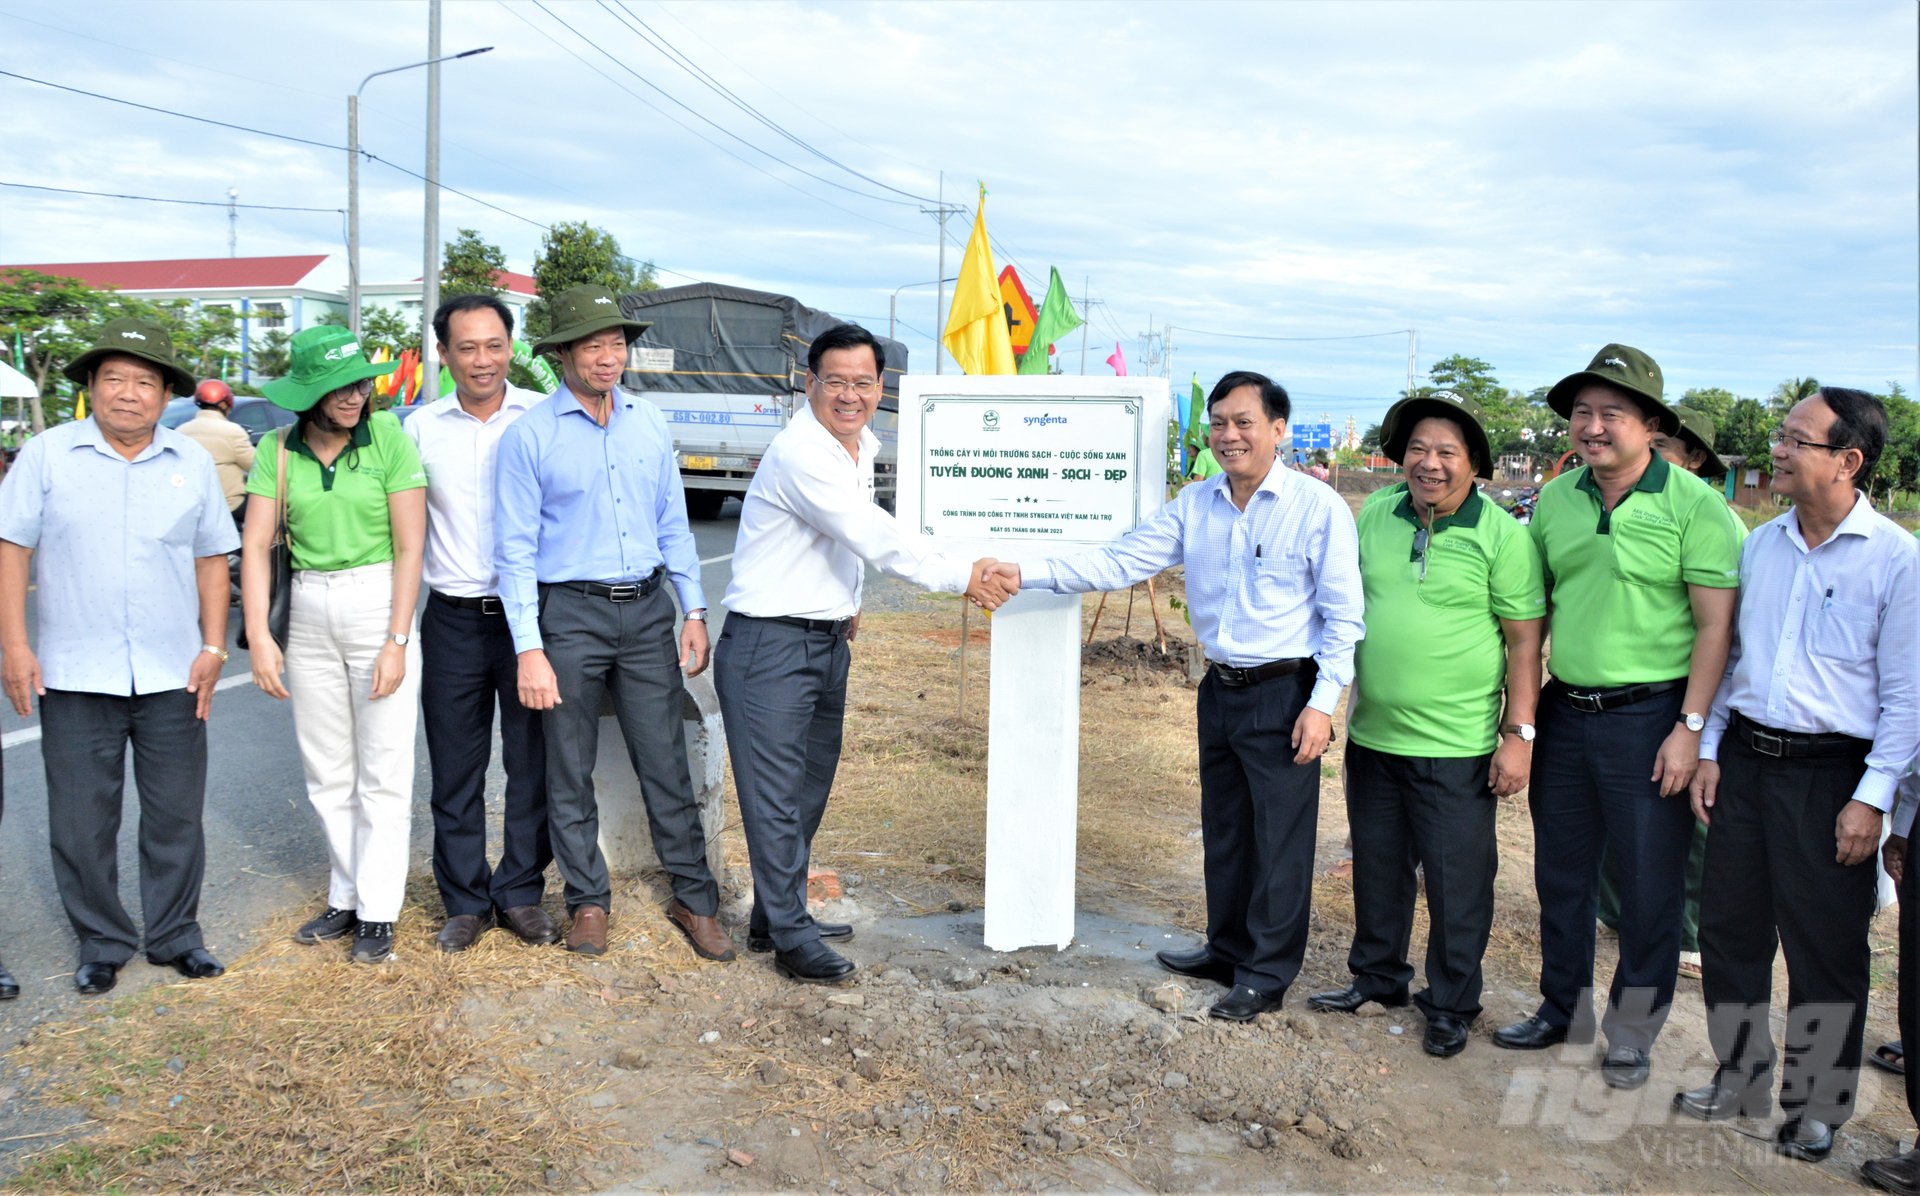 The launching ceremony of tree planting activities and the program 'Clean environment - Green life' - collecting pesticide packaging. Photo: Trung Chanh.